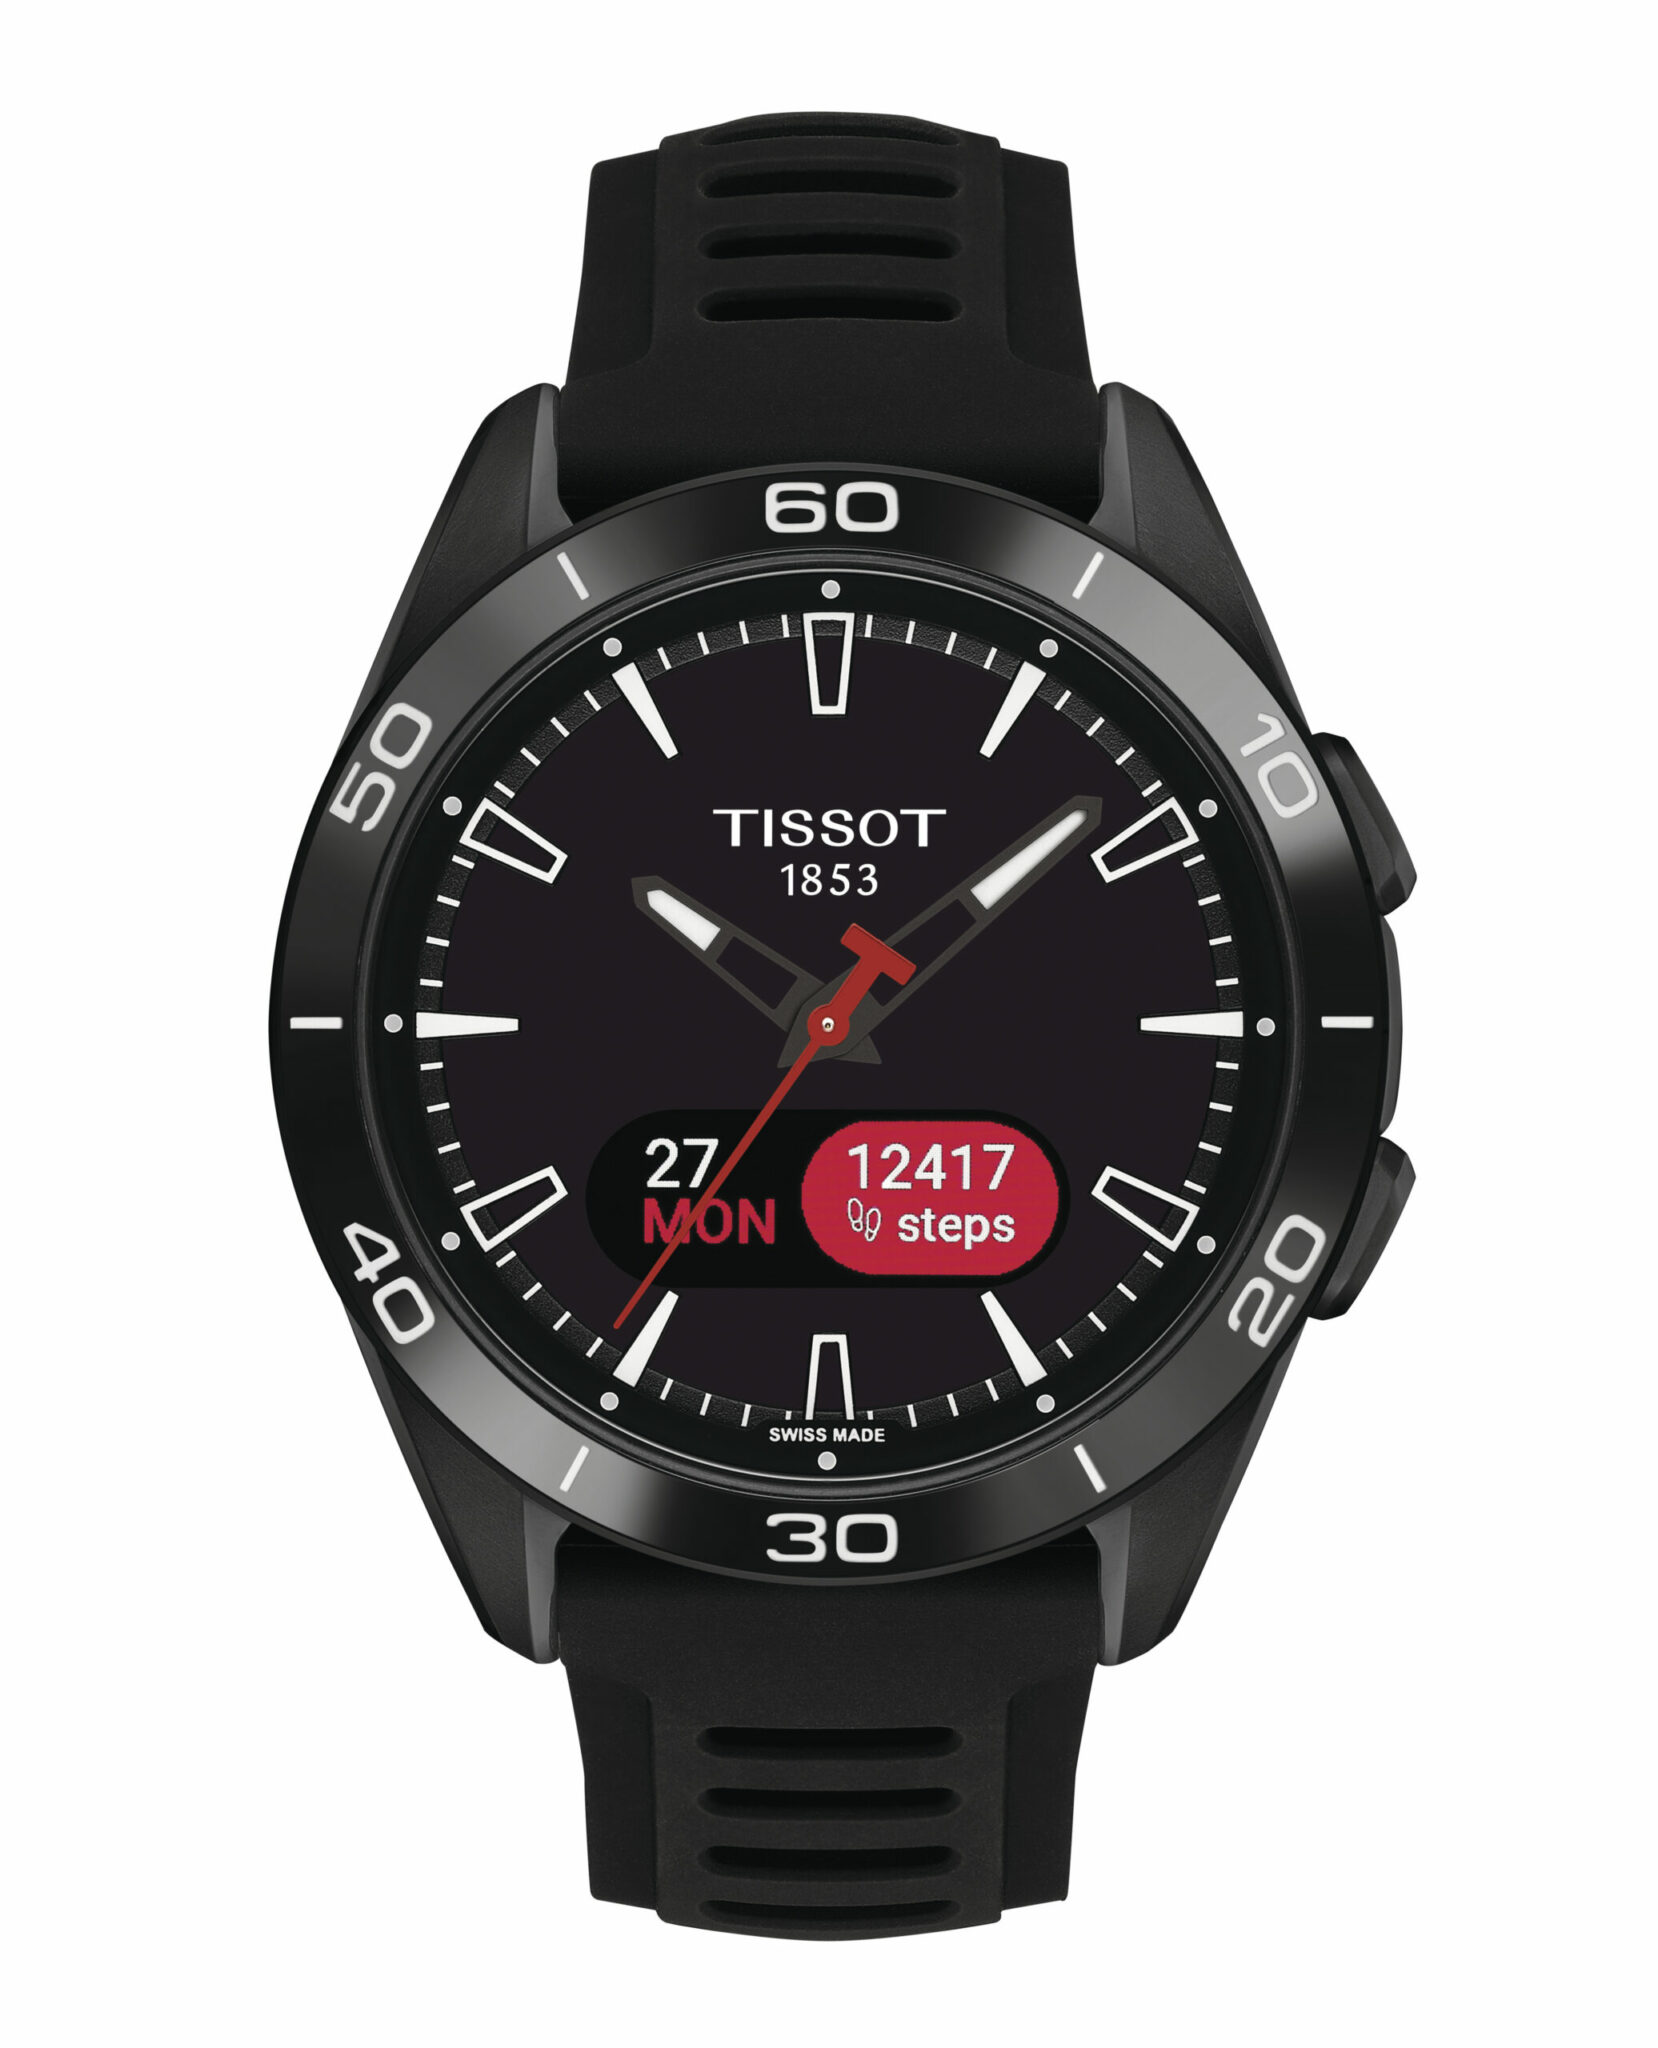 Tissot T-Touch Connect Sport: Harnessing Solar Technology